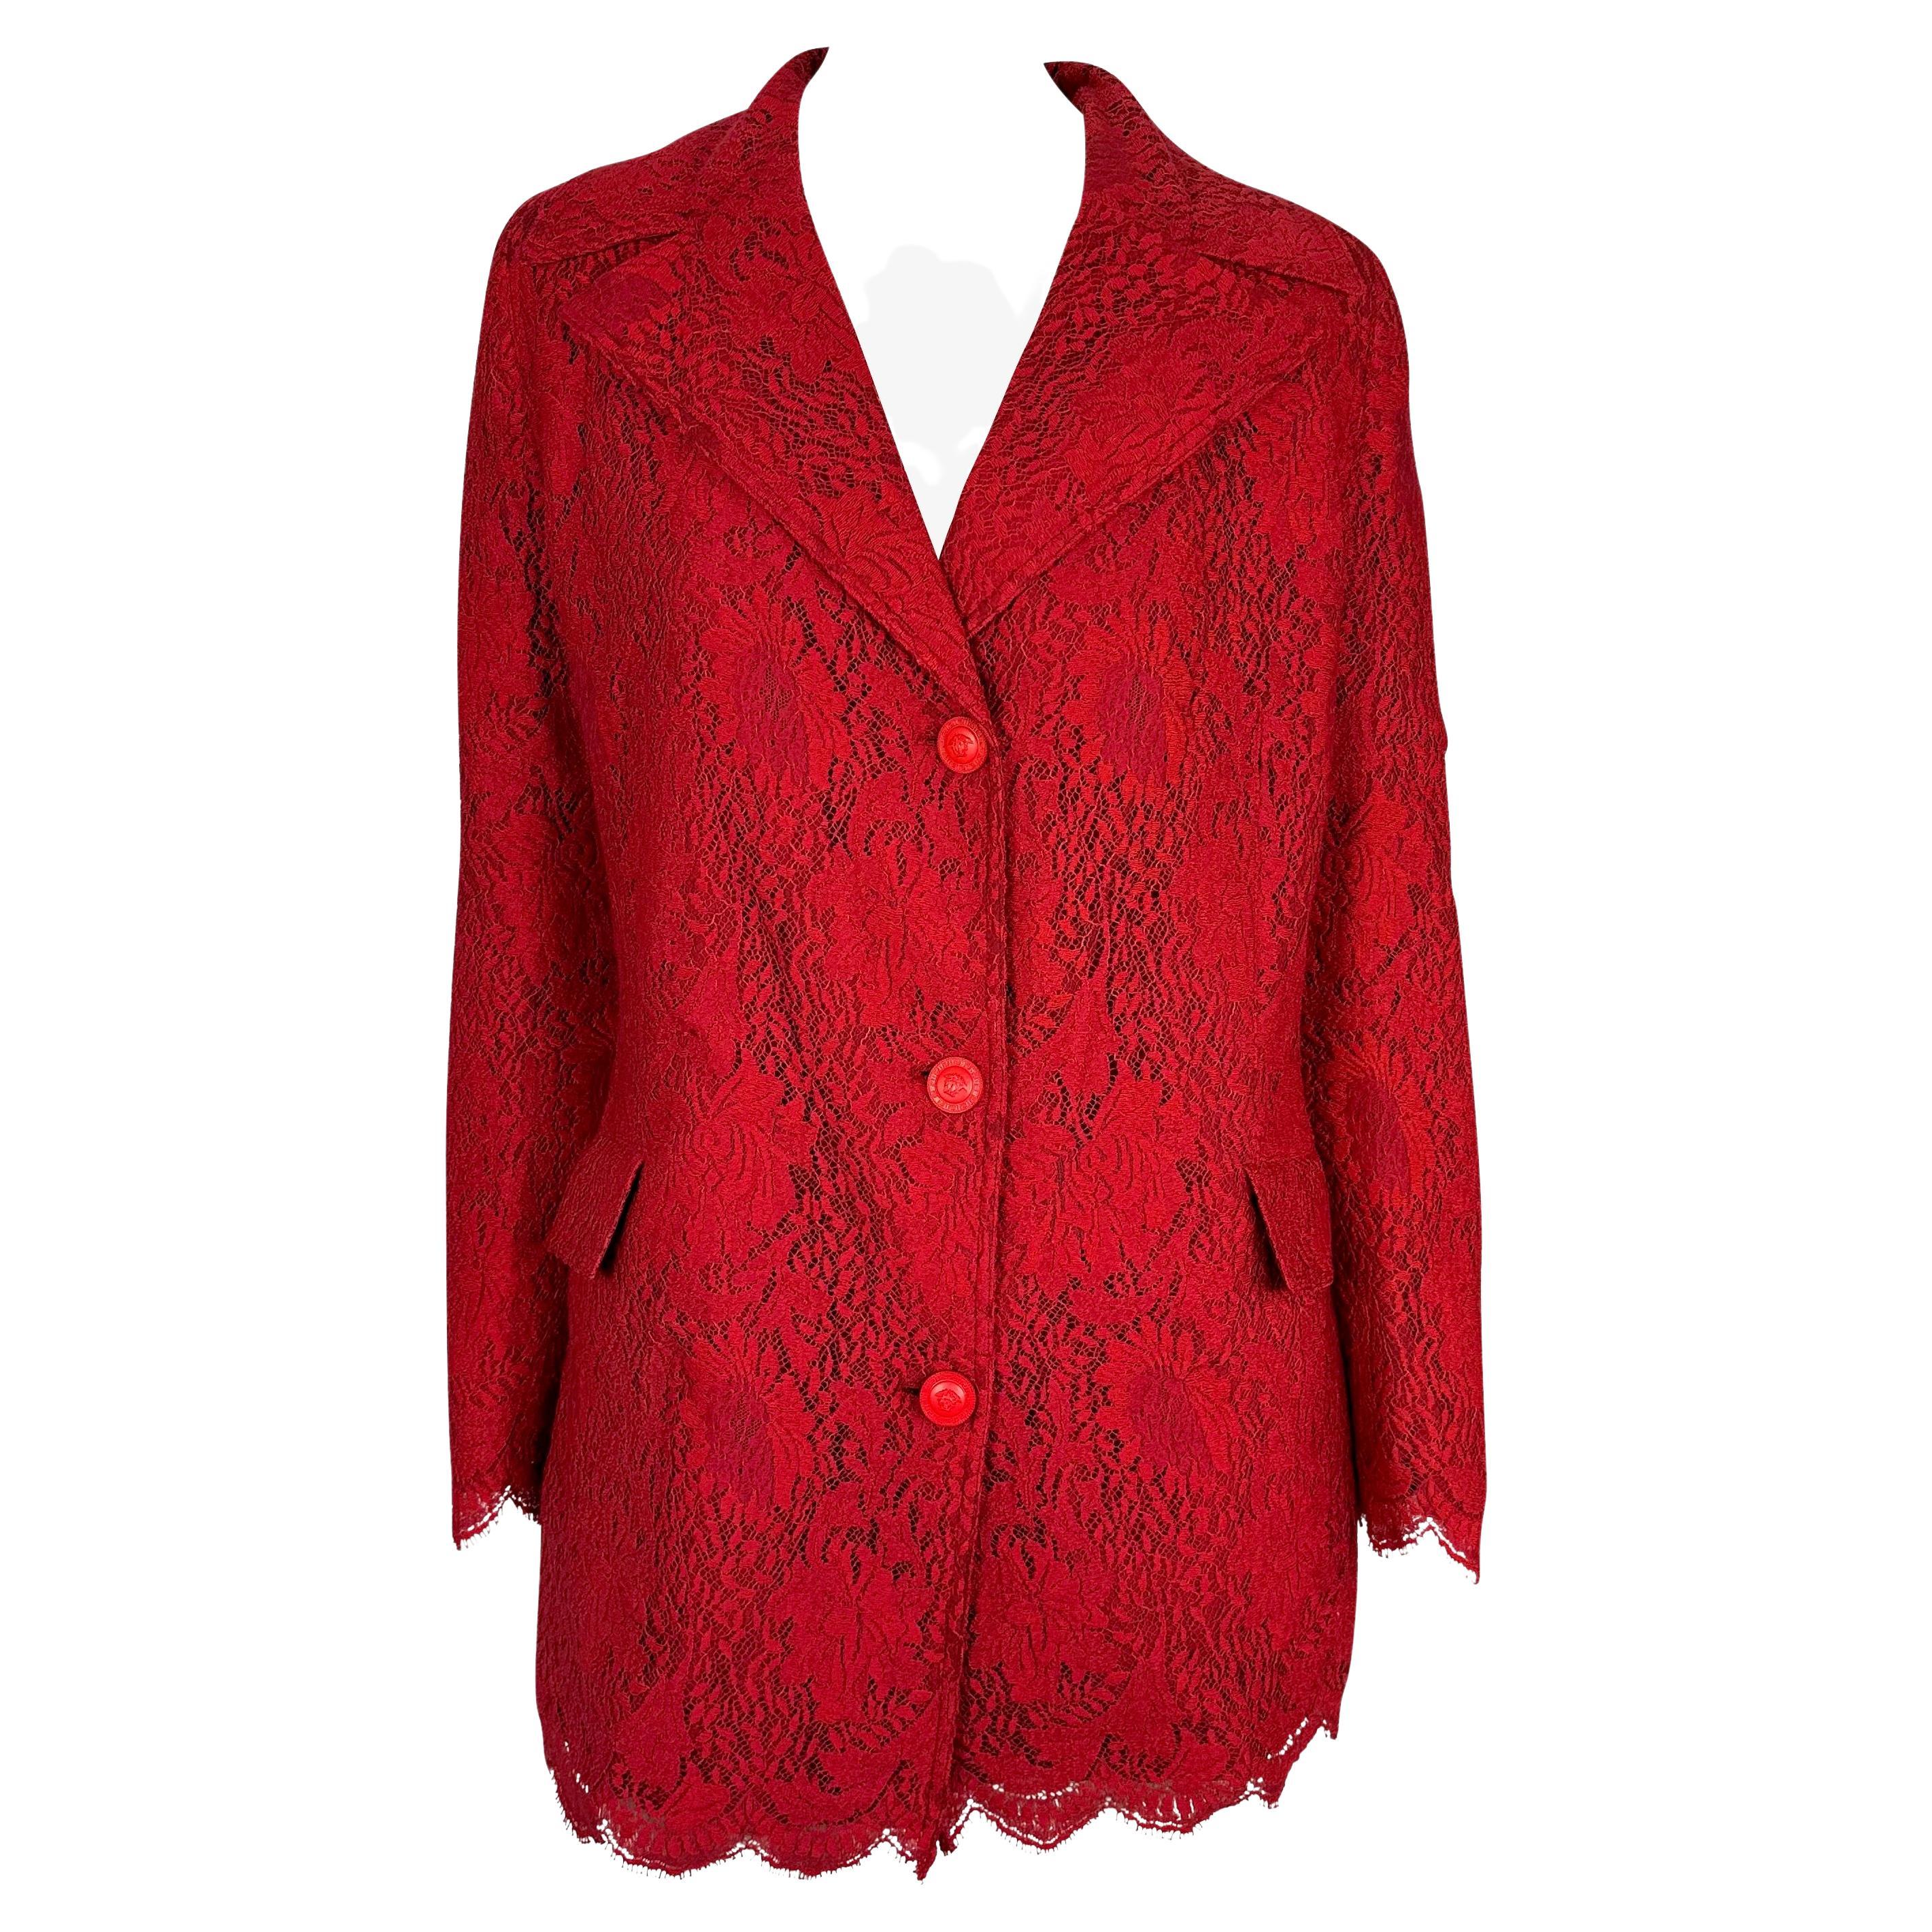 1996 Gianni Versace Red Lace Overlay Monochrome Medusa Coat For Sale